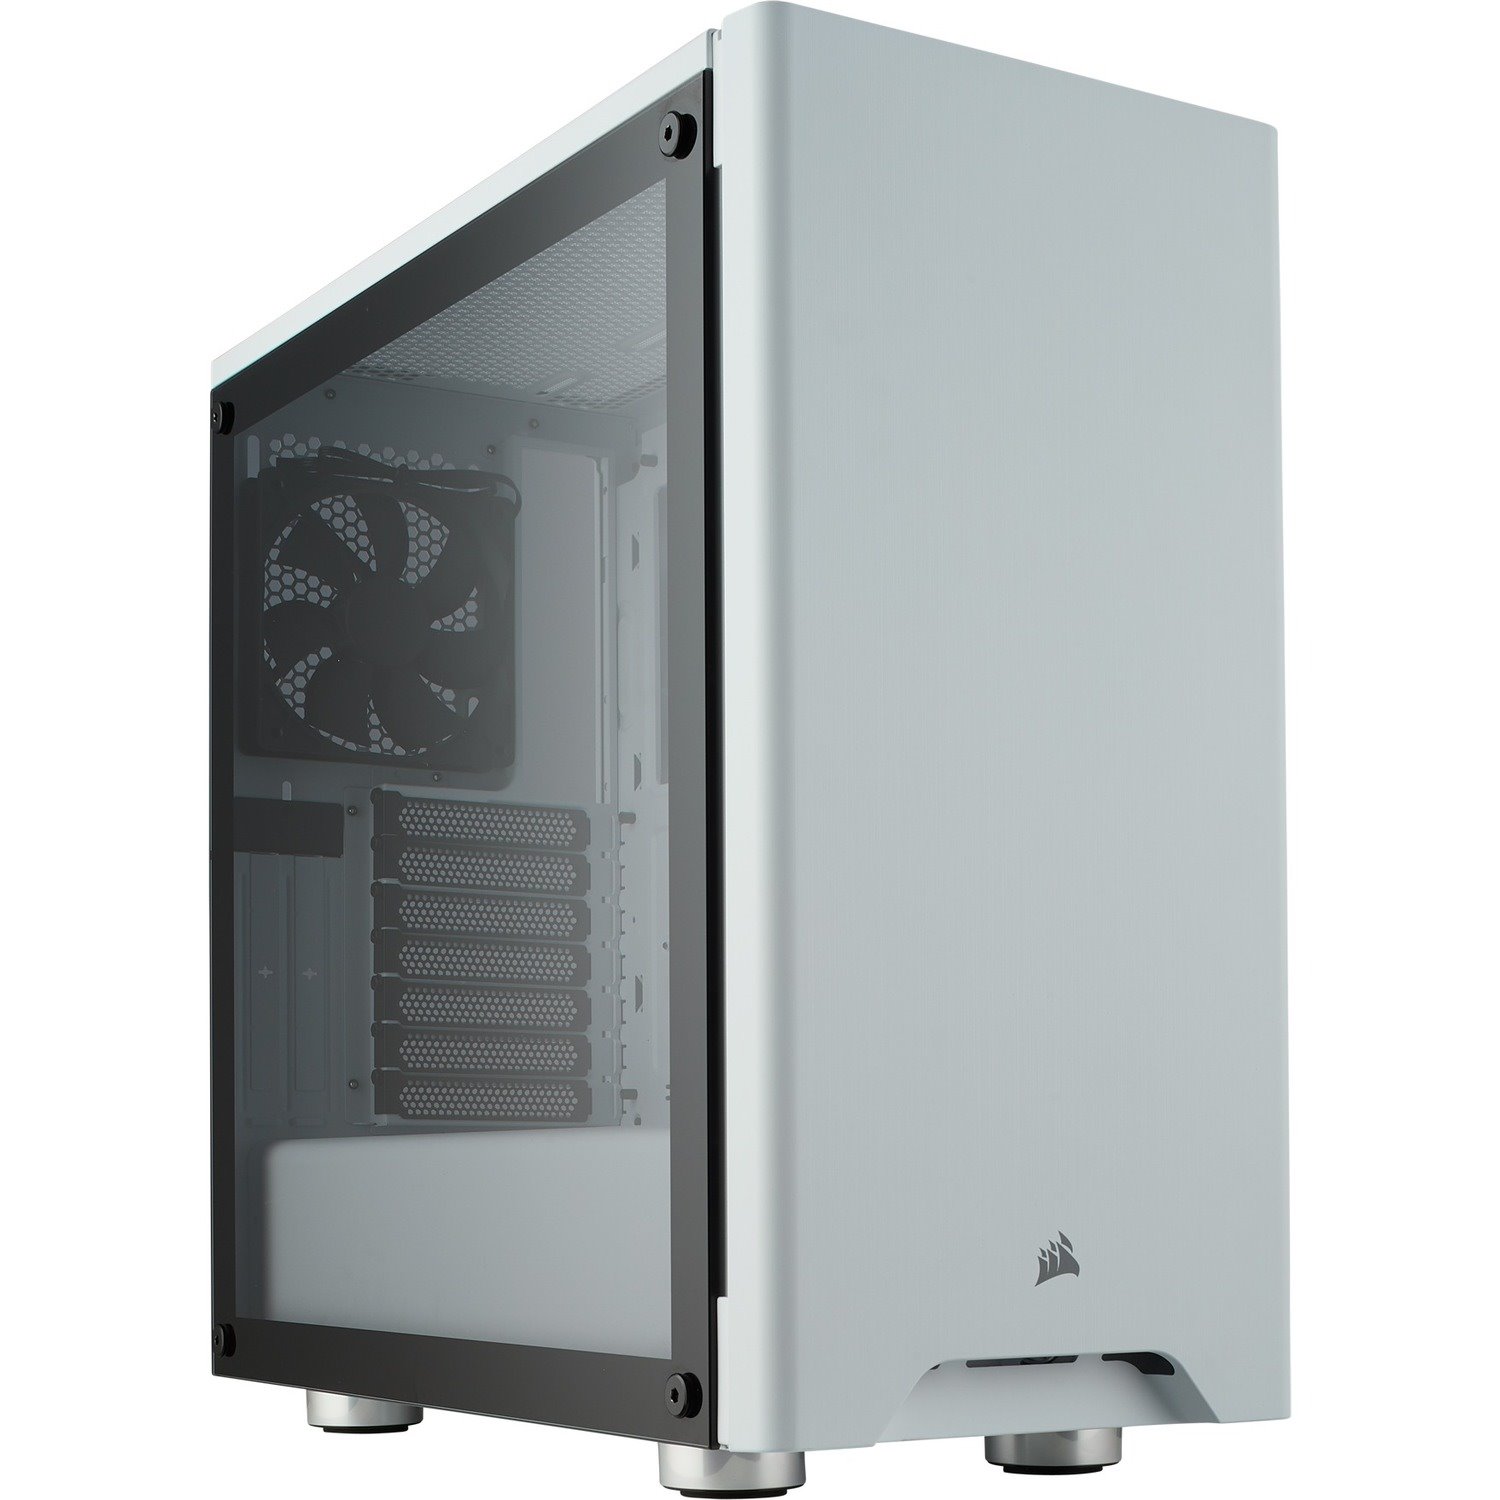 Corsair Carbide 275R Computer Case - ATX, Micro ATX, Mini ITX Motherboard Supported - Mid-tower - Steel, Plastic, Tempered Glass - White